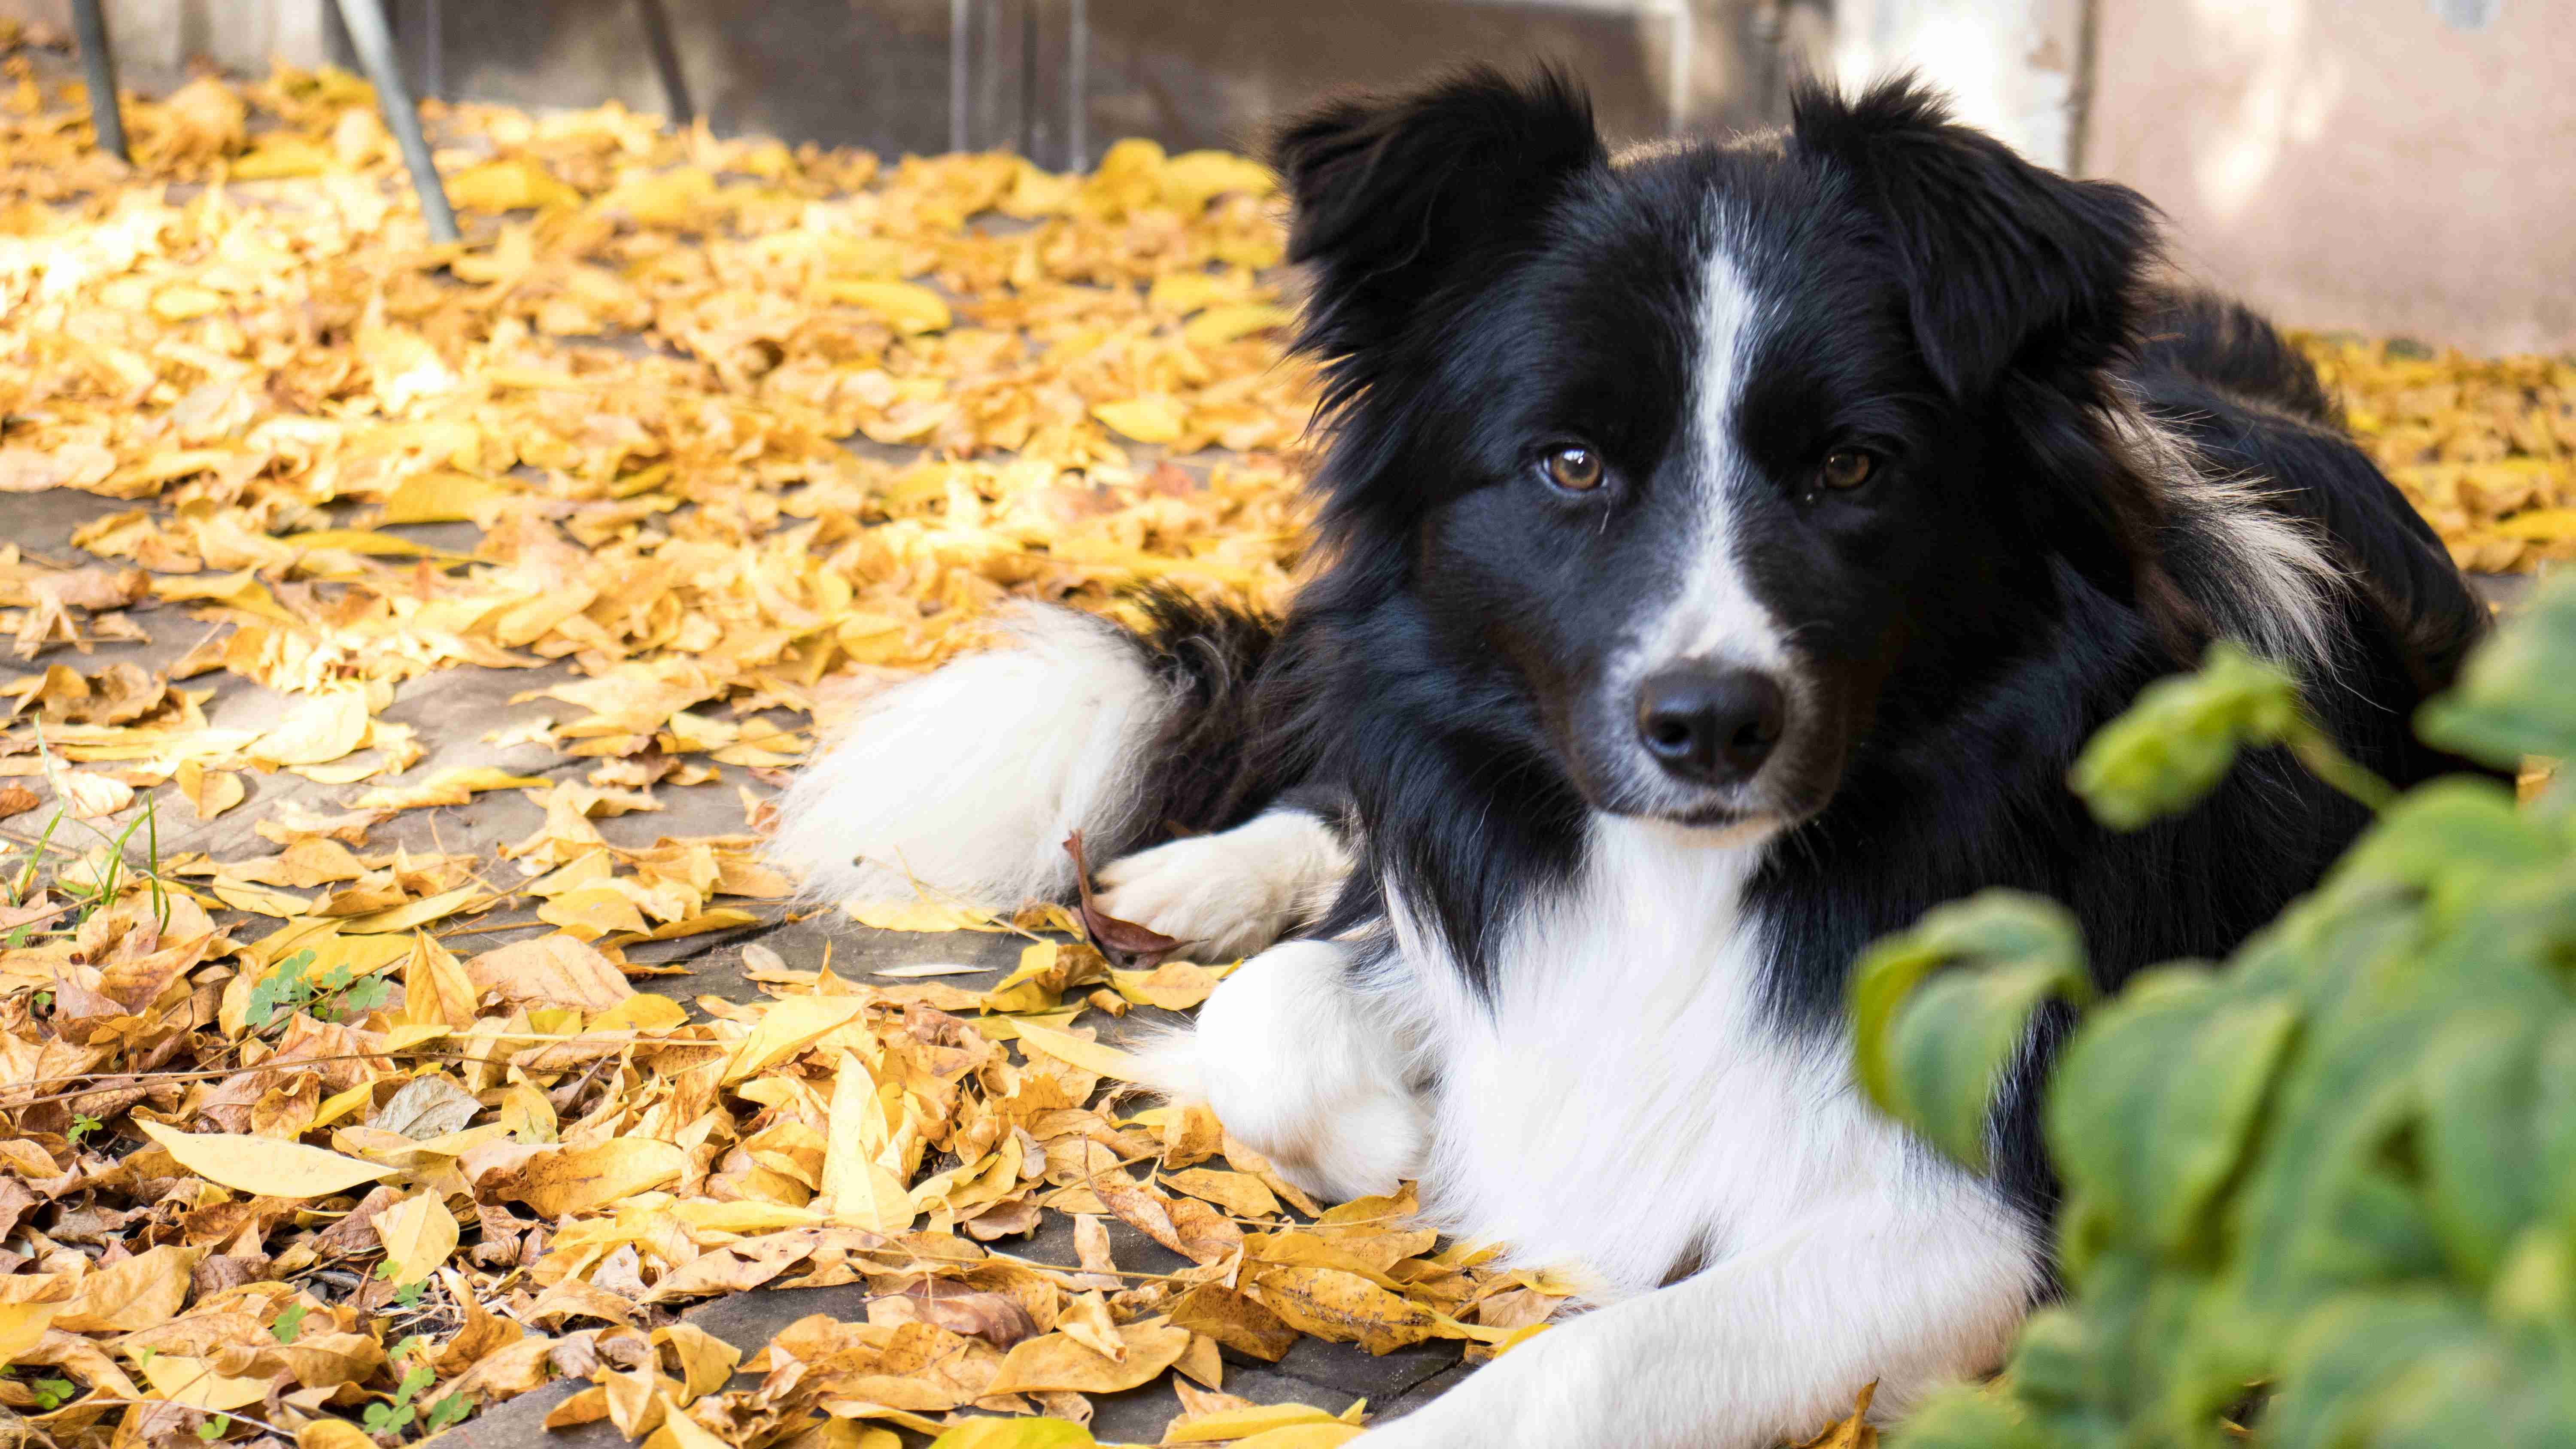 Border Collie Training 101: Tips to Help Your Dog Feel Comfortable in New Environments and Around New People